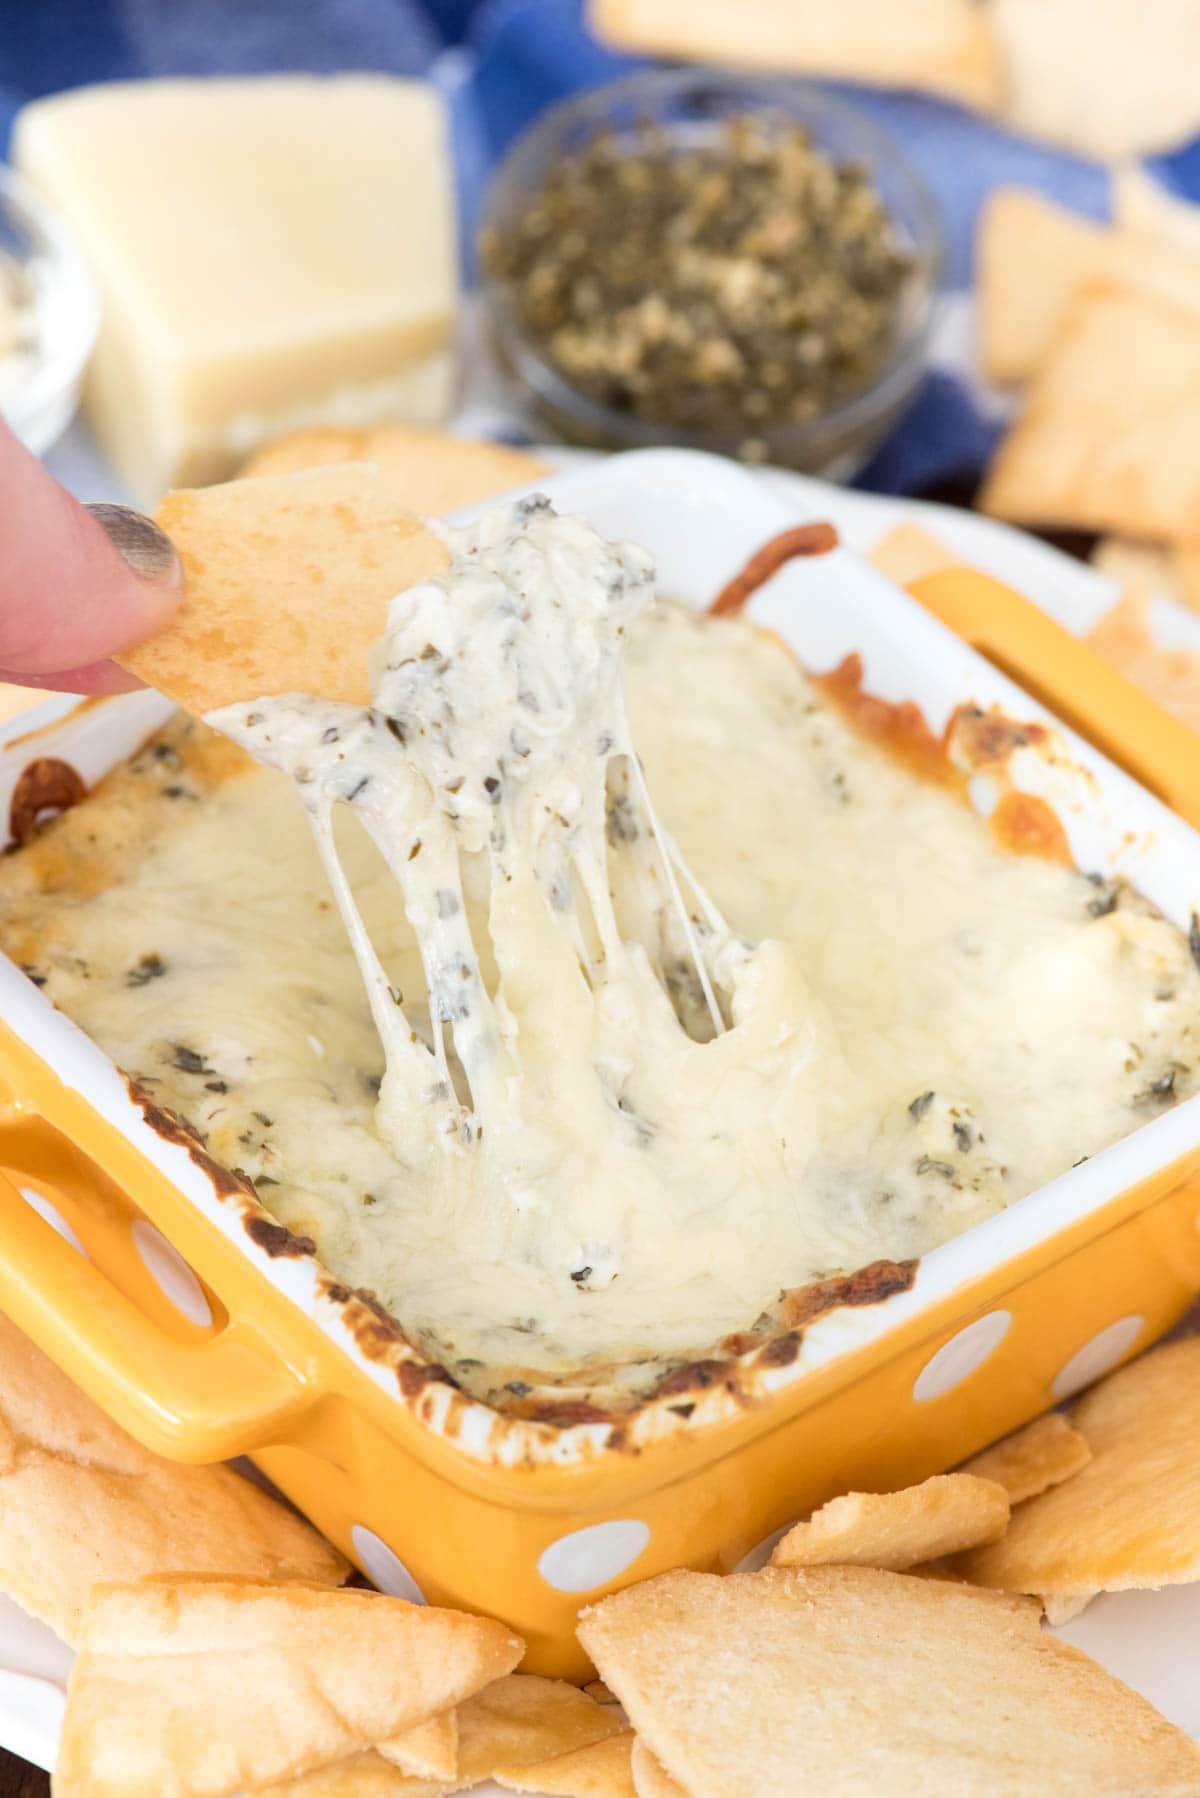 Hot Cheesy Pesto Dip - this super EASY appetizer is the perfect dip! Just 5 ingredients make a gooey cheesy dip full of basil and garlic pesto flavor!